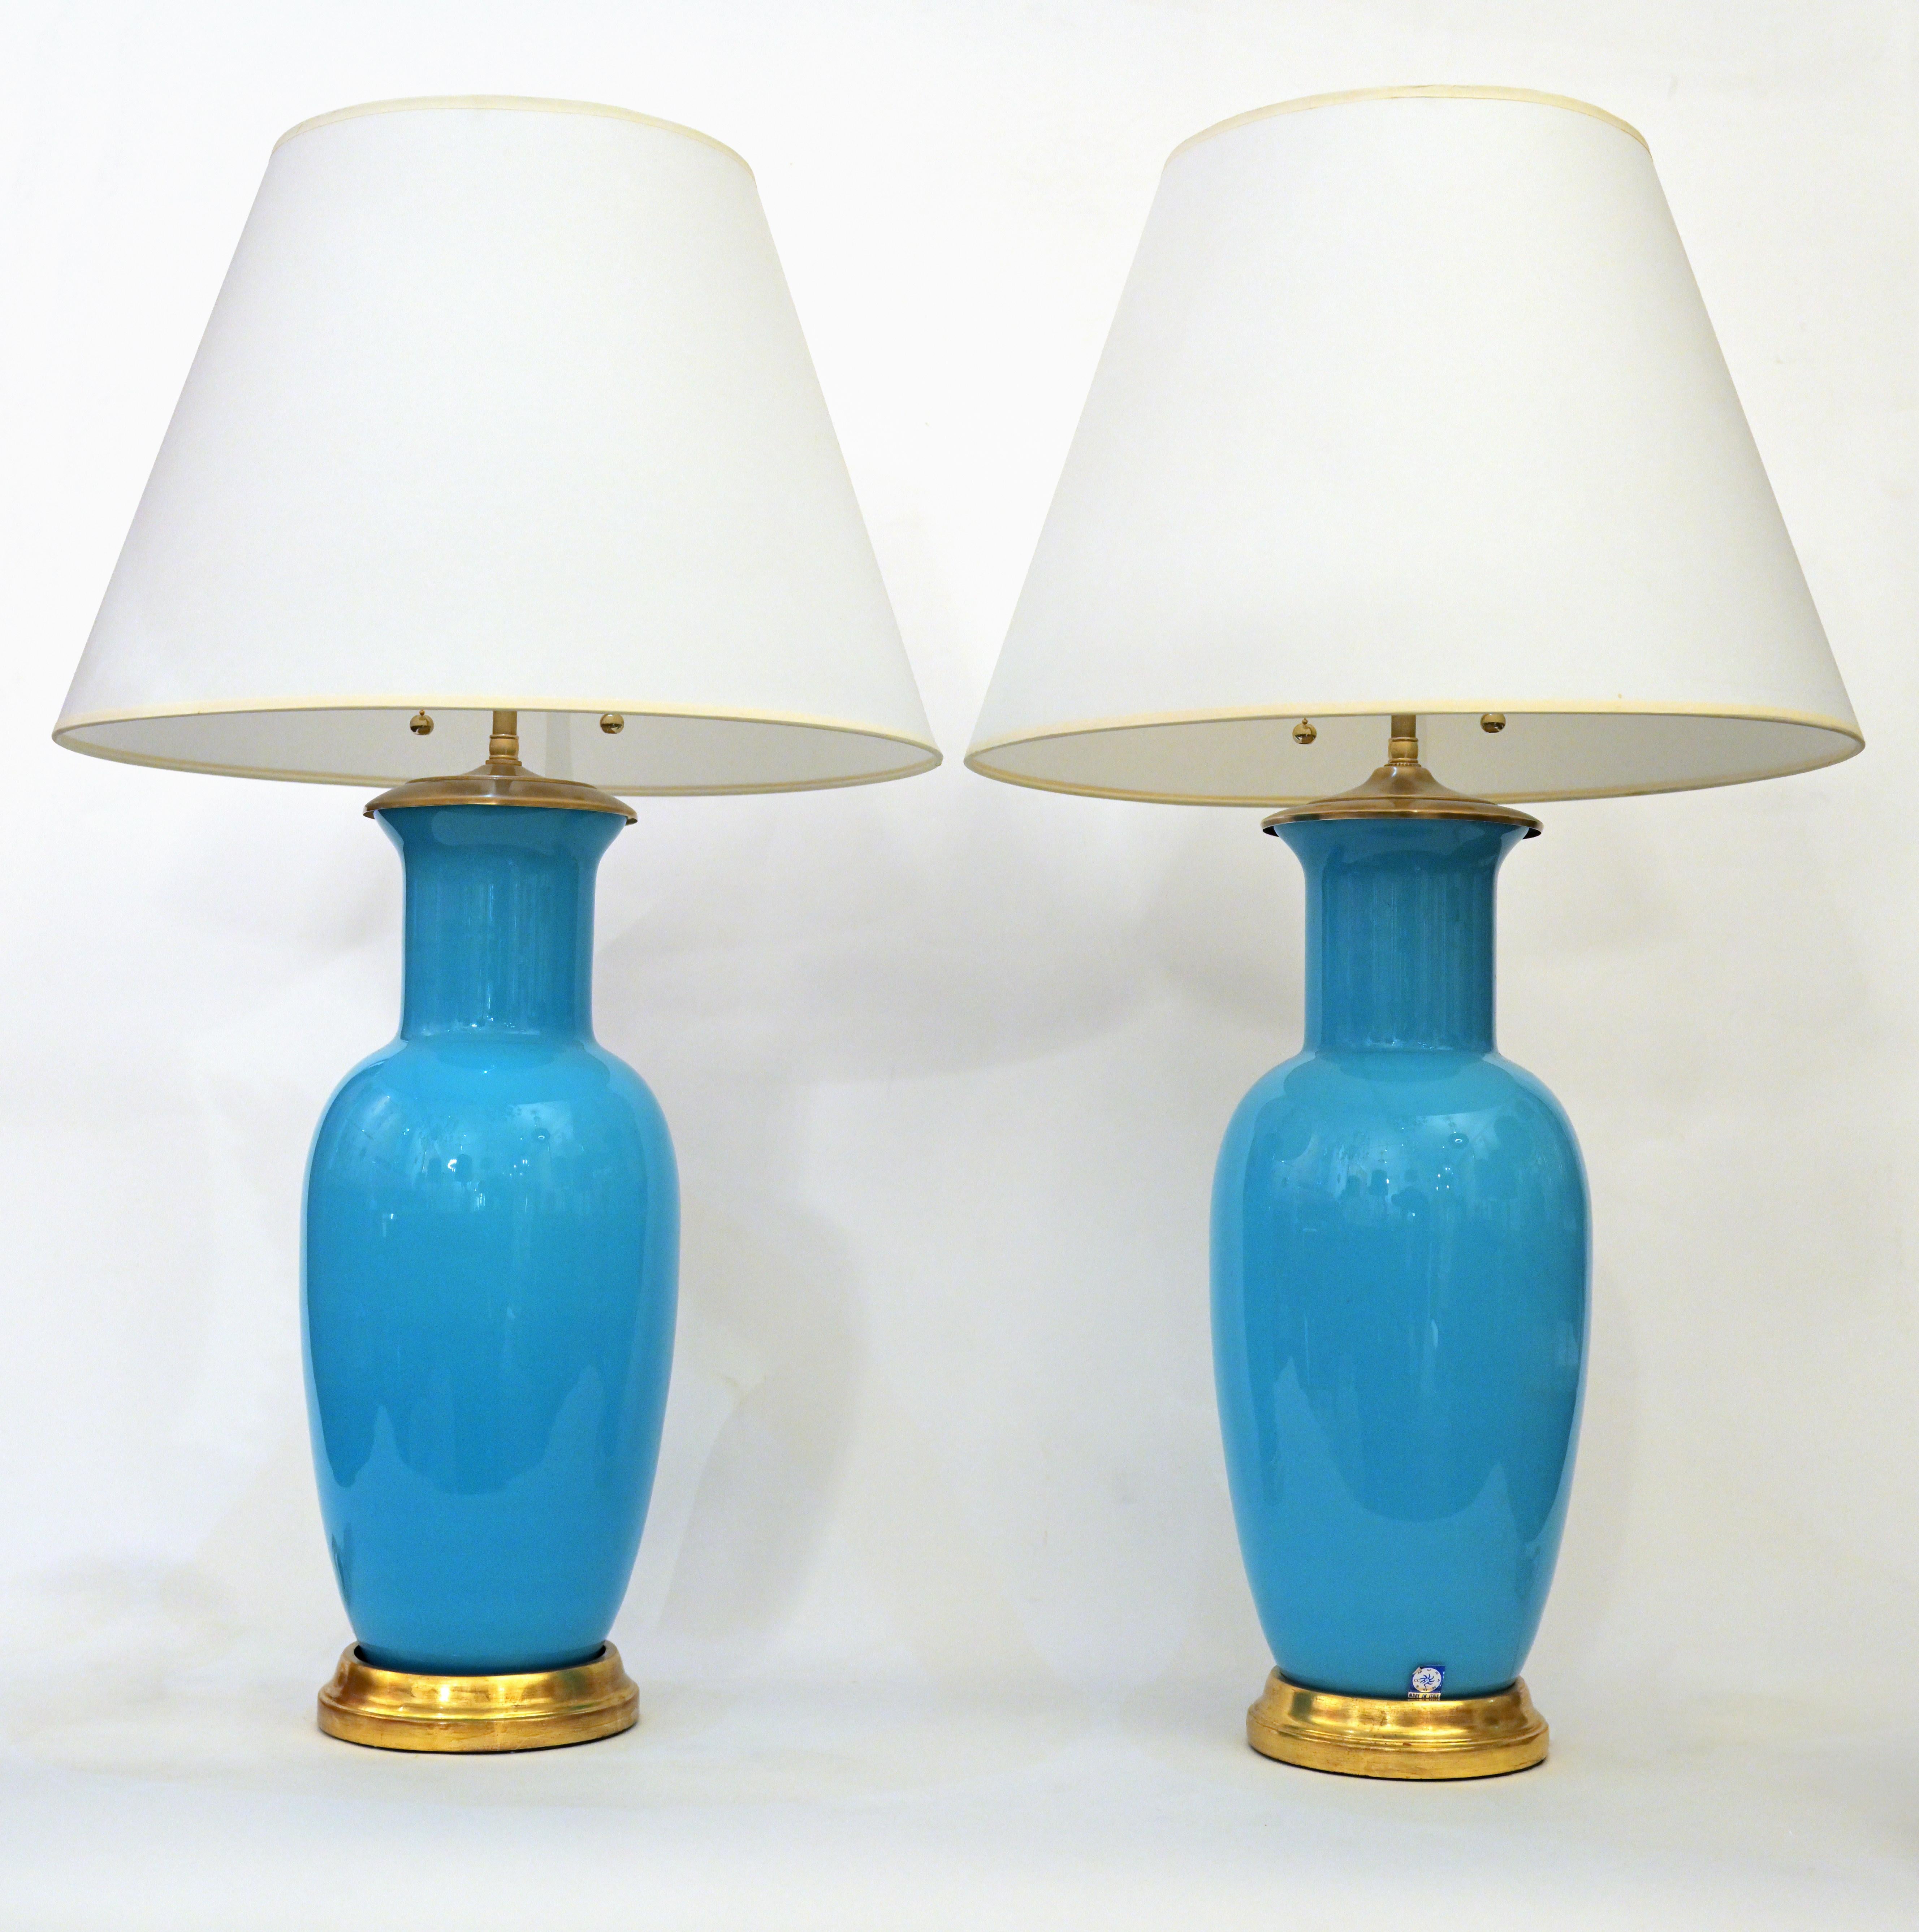 Pair of Cerulean Murano Glass Table Lamps by David Duncan Studio In Excellent Condition For Sale In New York, NY